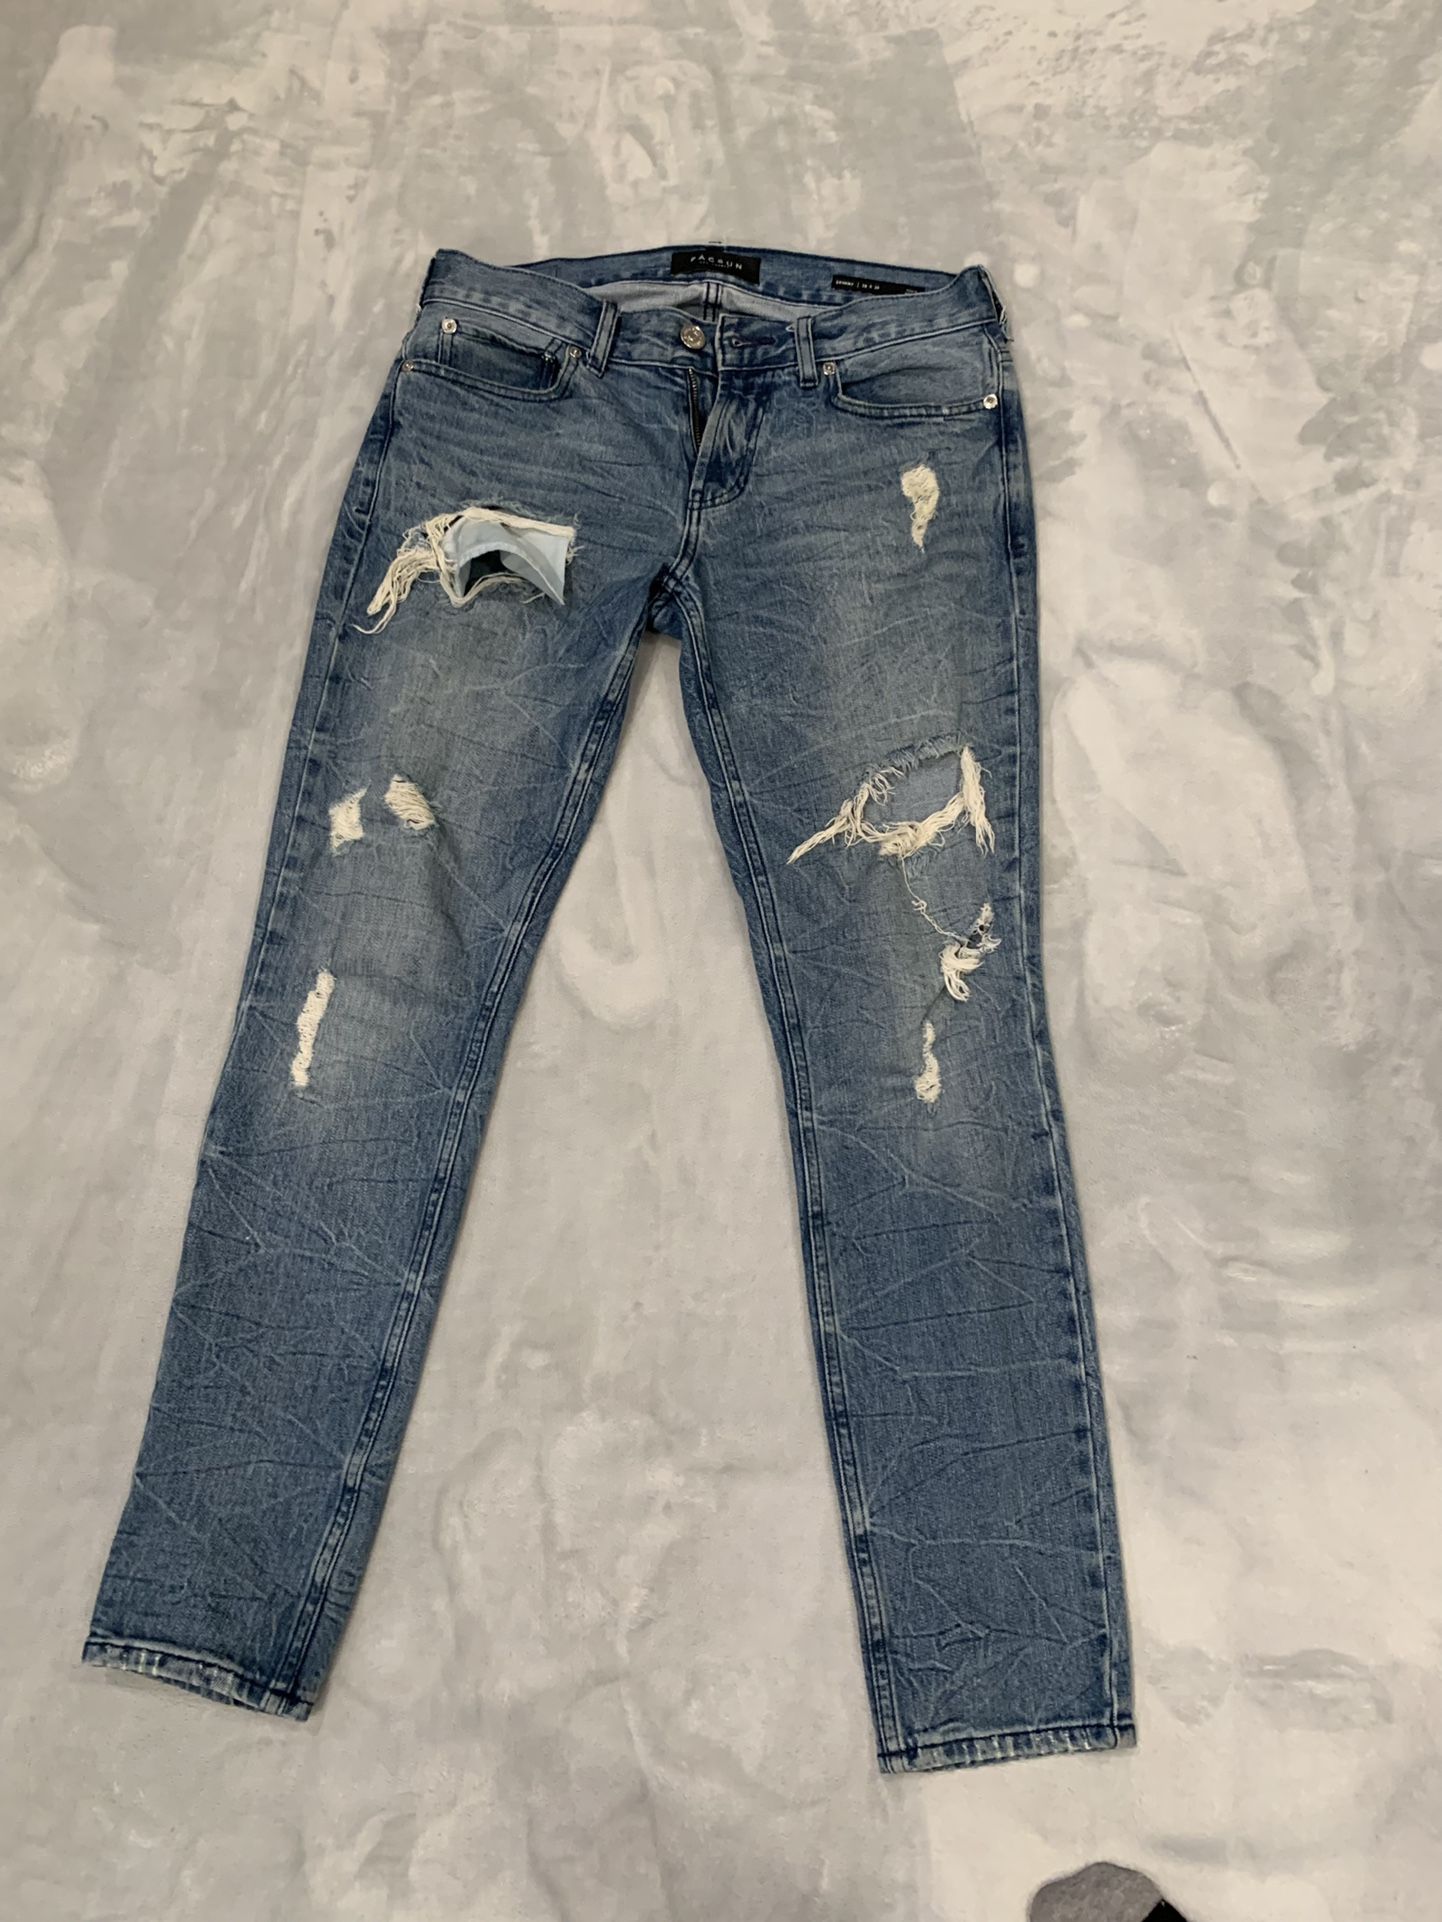 Pacsun Skinny Ripped Jeans 👖 Size 29 